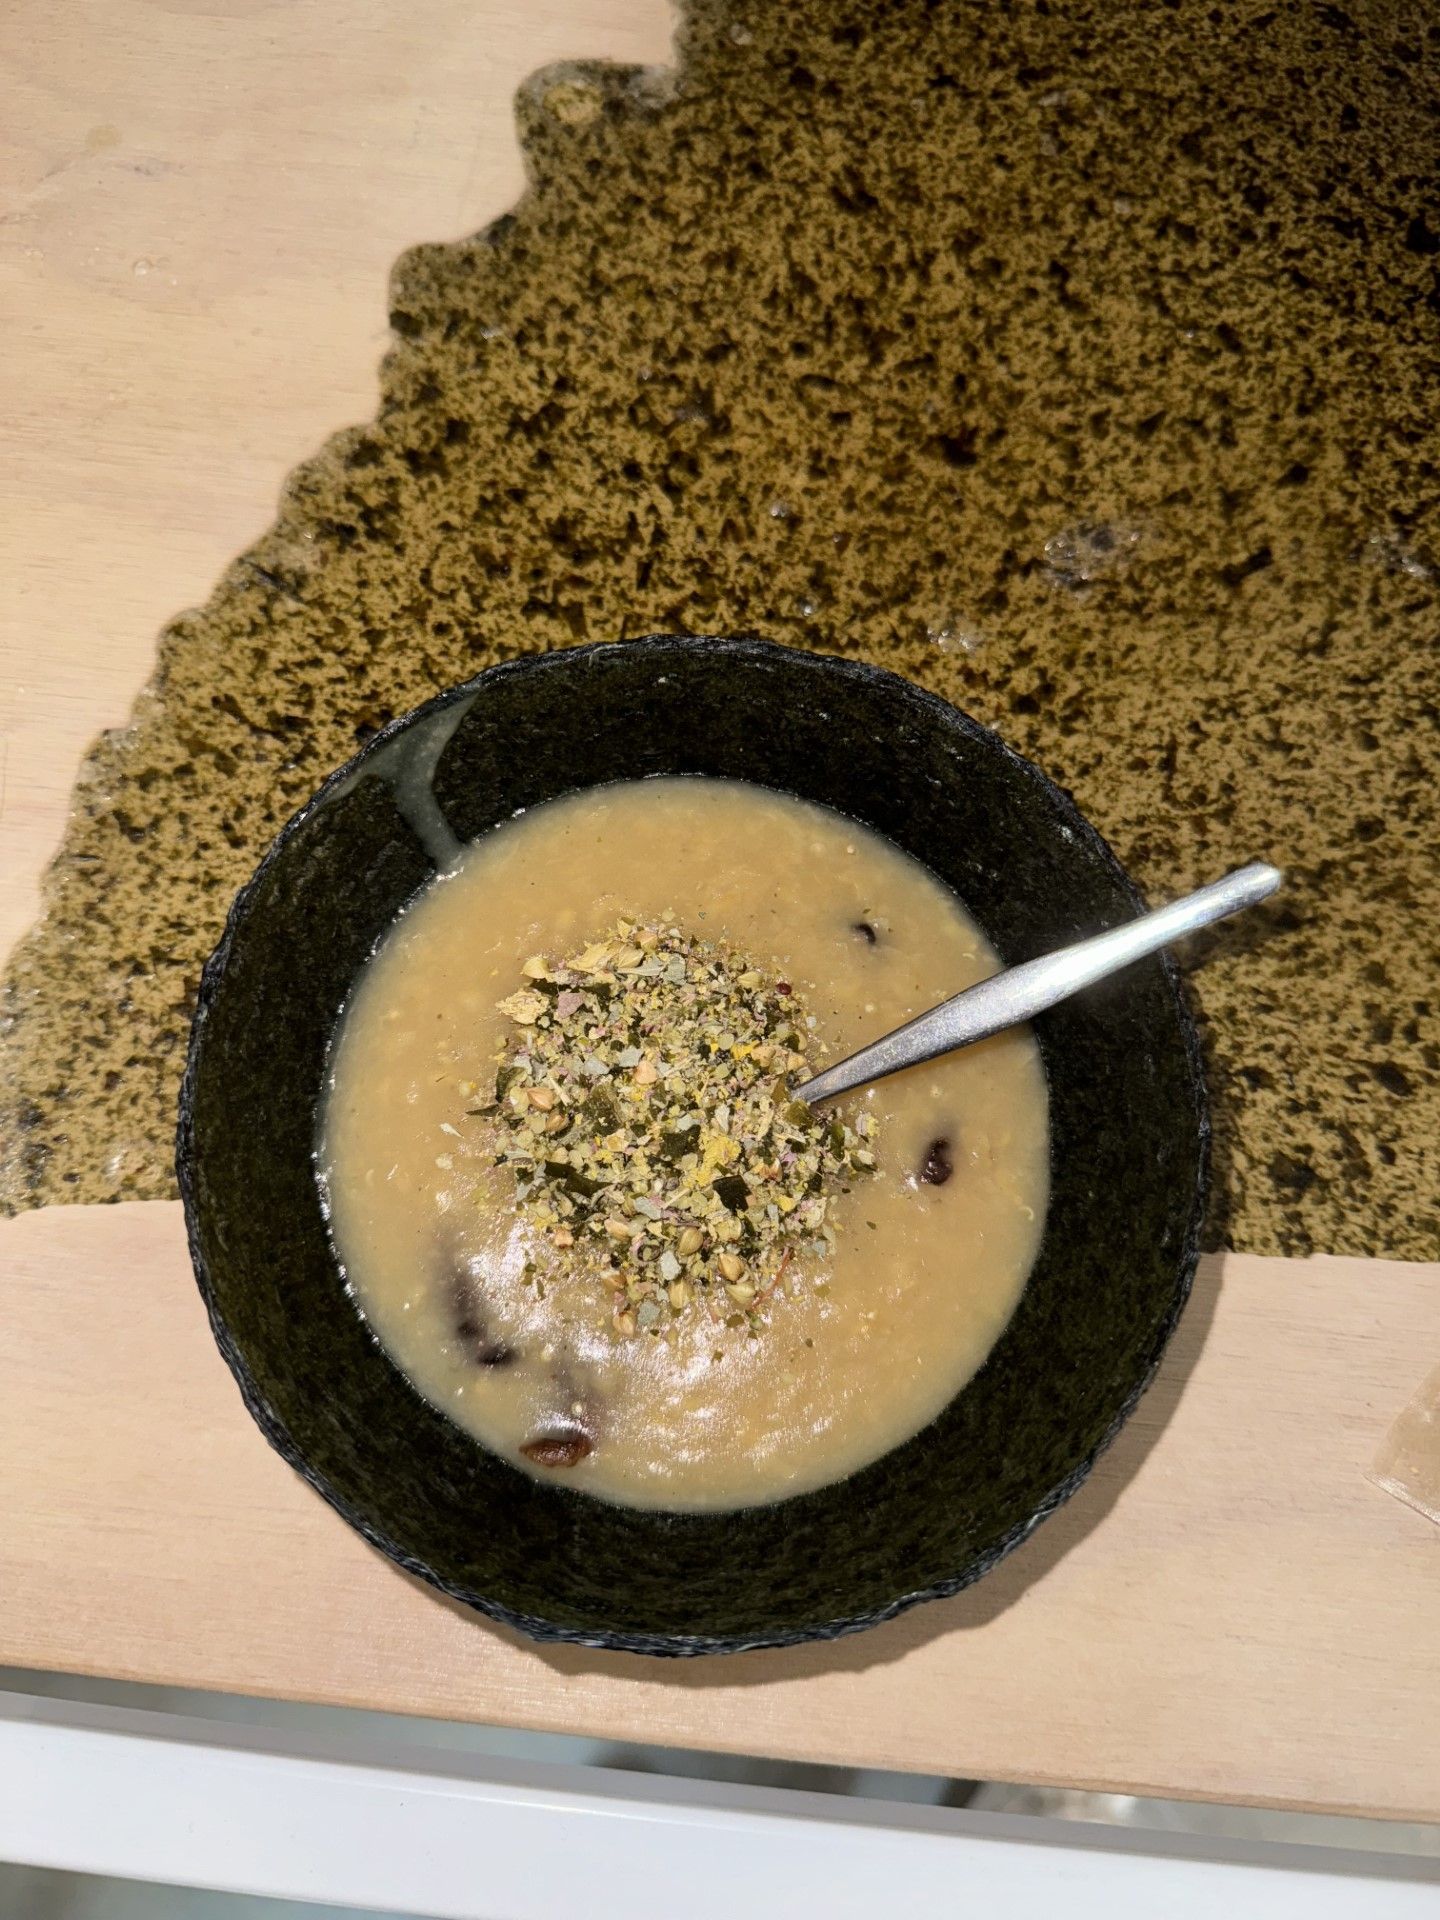 Guests were treated to a range of nutritious snacks and diches, like this flavourful mushroom soup. Credit: Back Cover Media